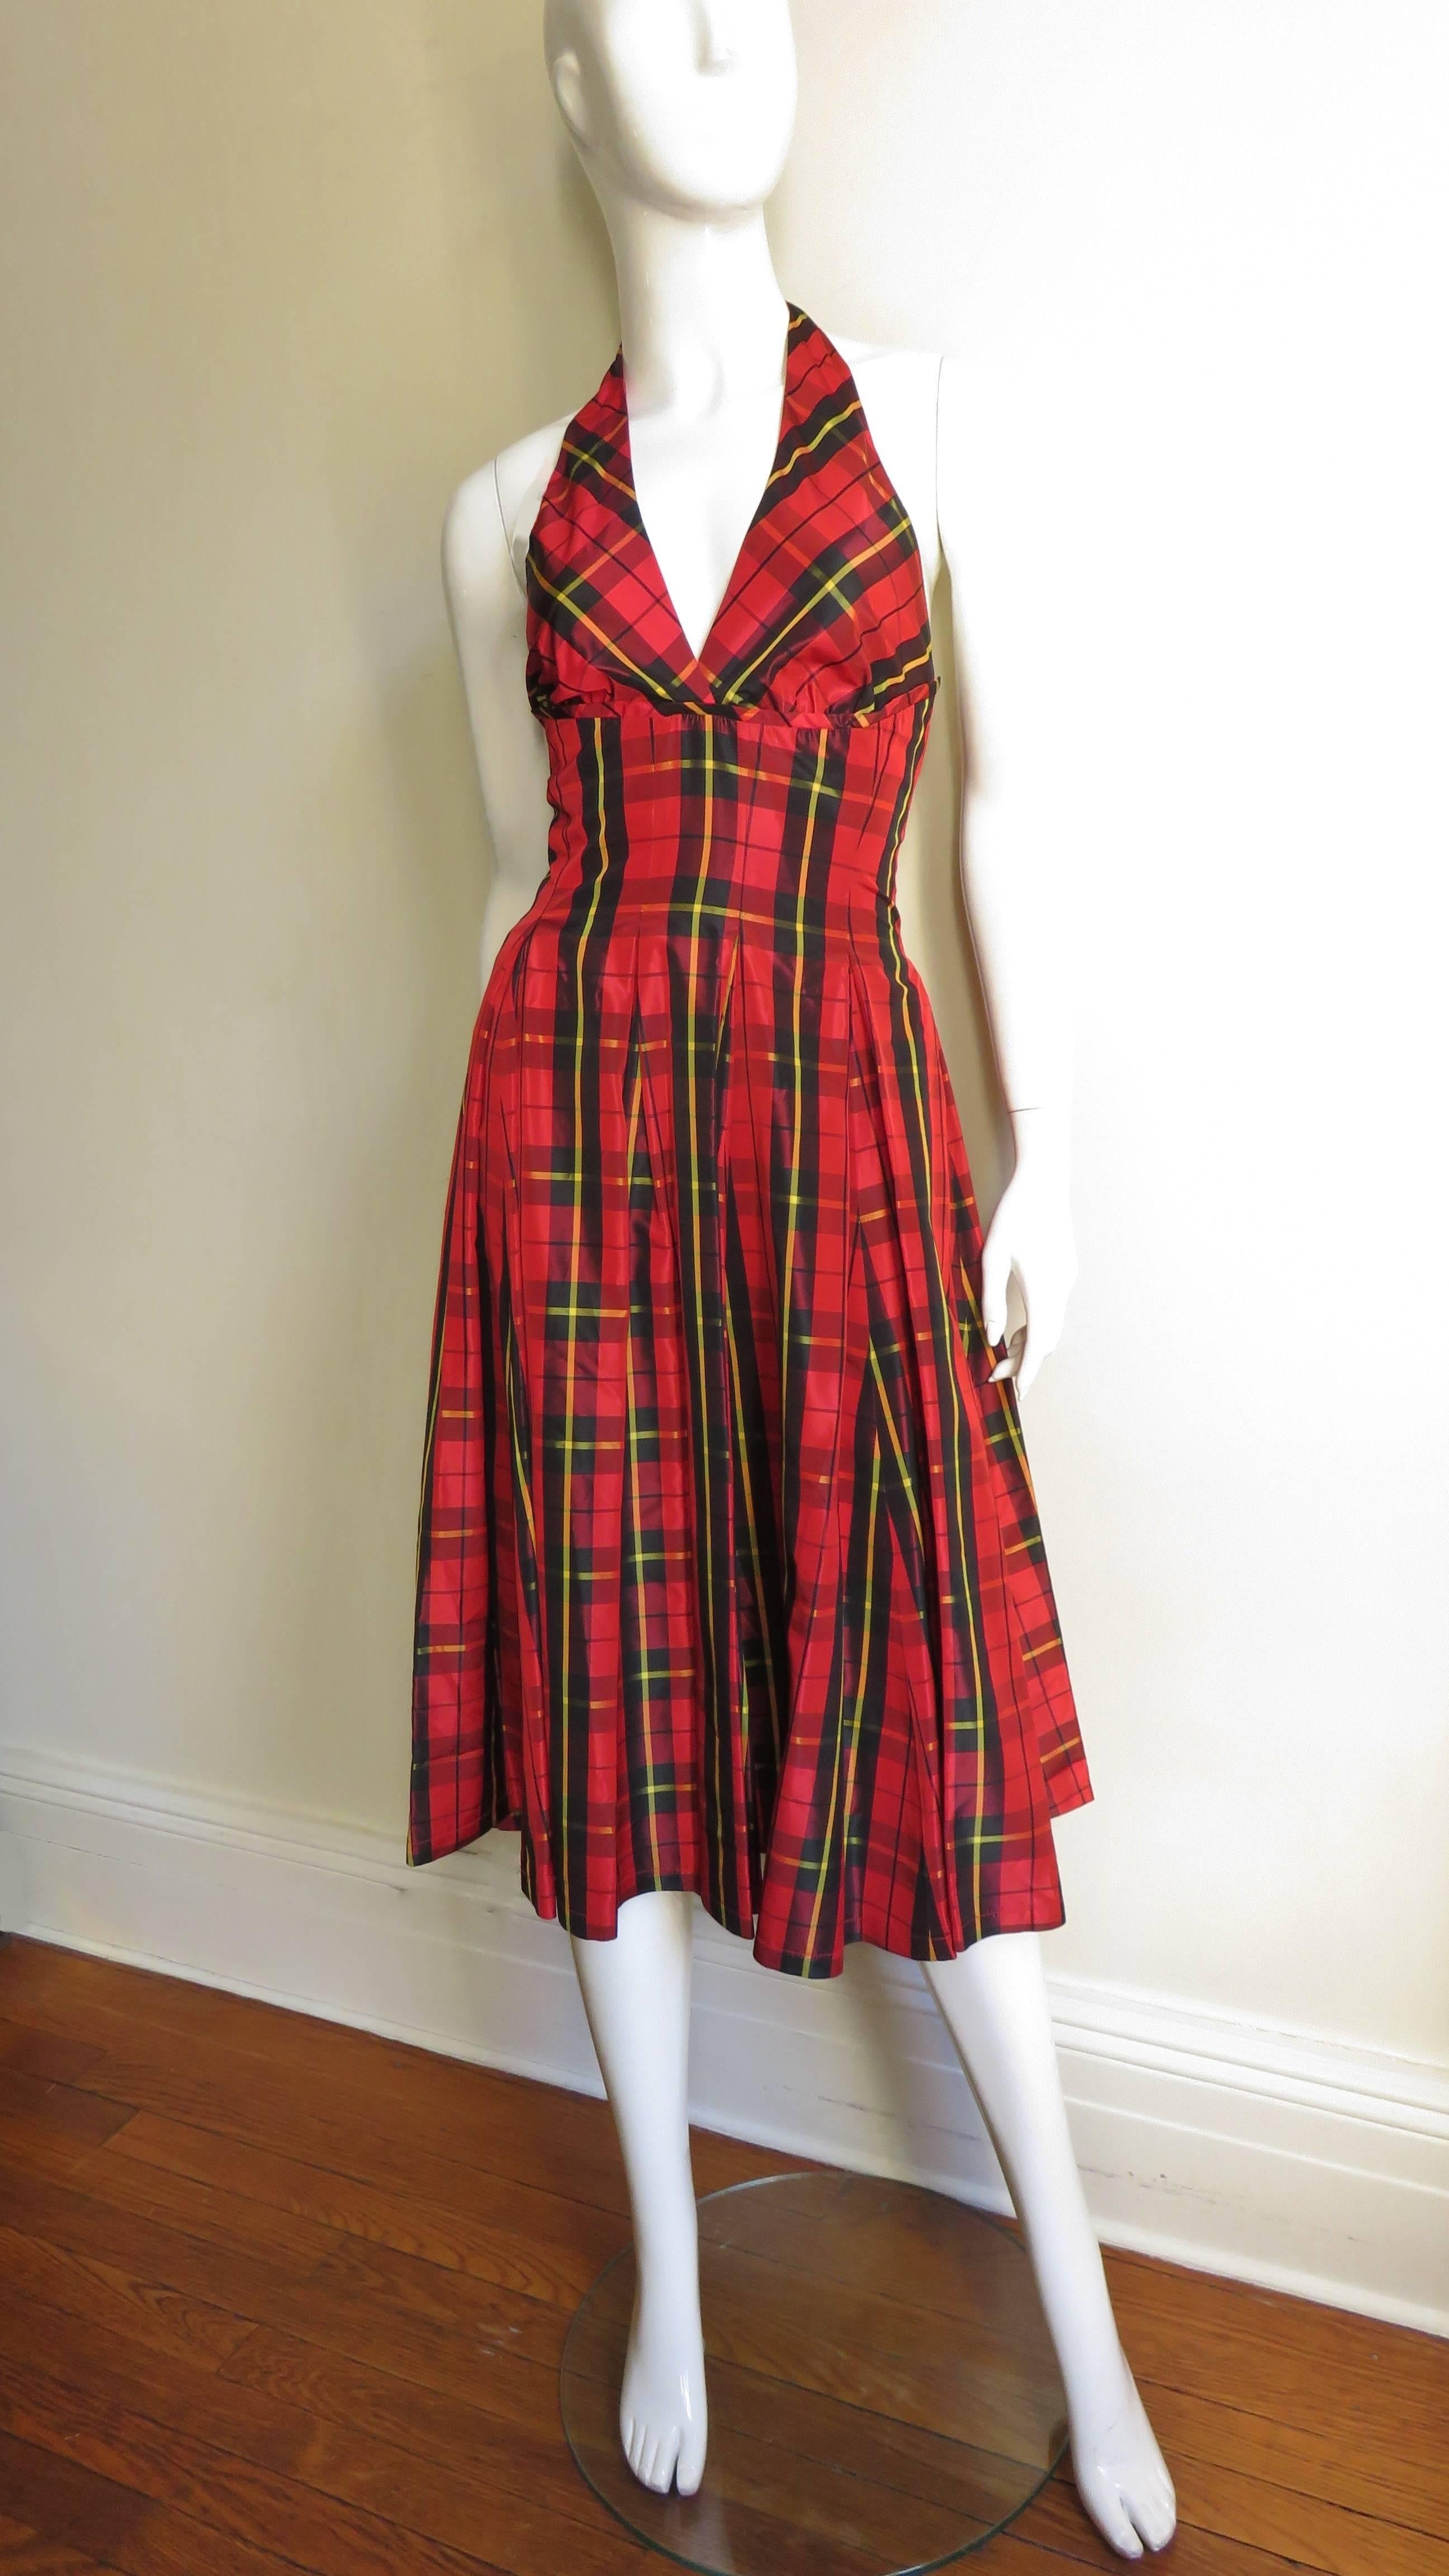 A great red, black and yellow taffeta plaid dress from Moschino.  It is halter style with a tucked fitted waist and box pleats that release just below the waist to a full skirt.  The is 1/2